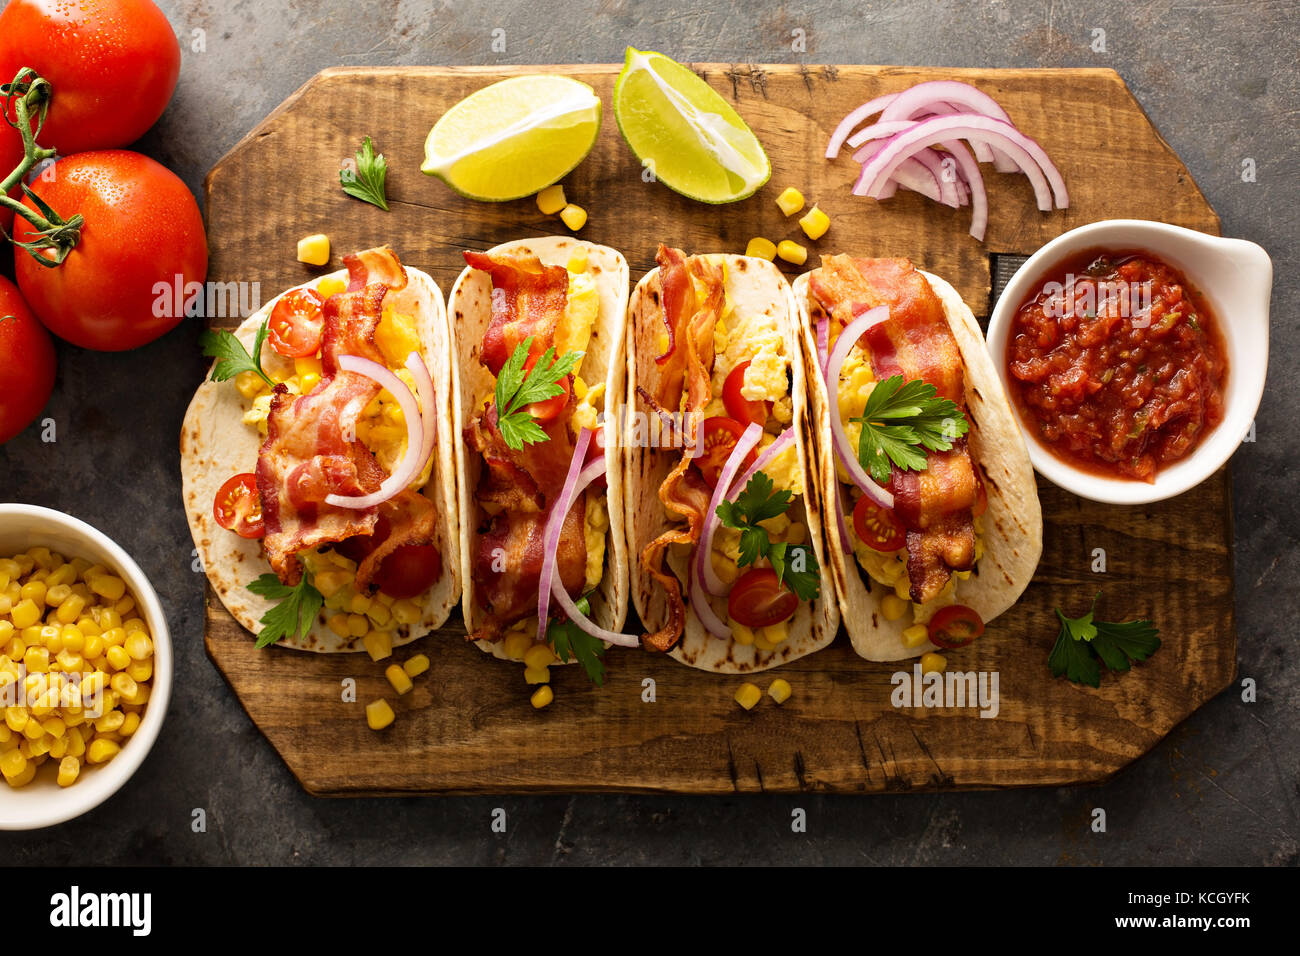 Breakfast tacos with scrambled eggs and bacon Stock Photo